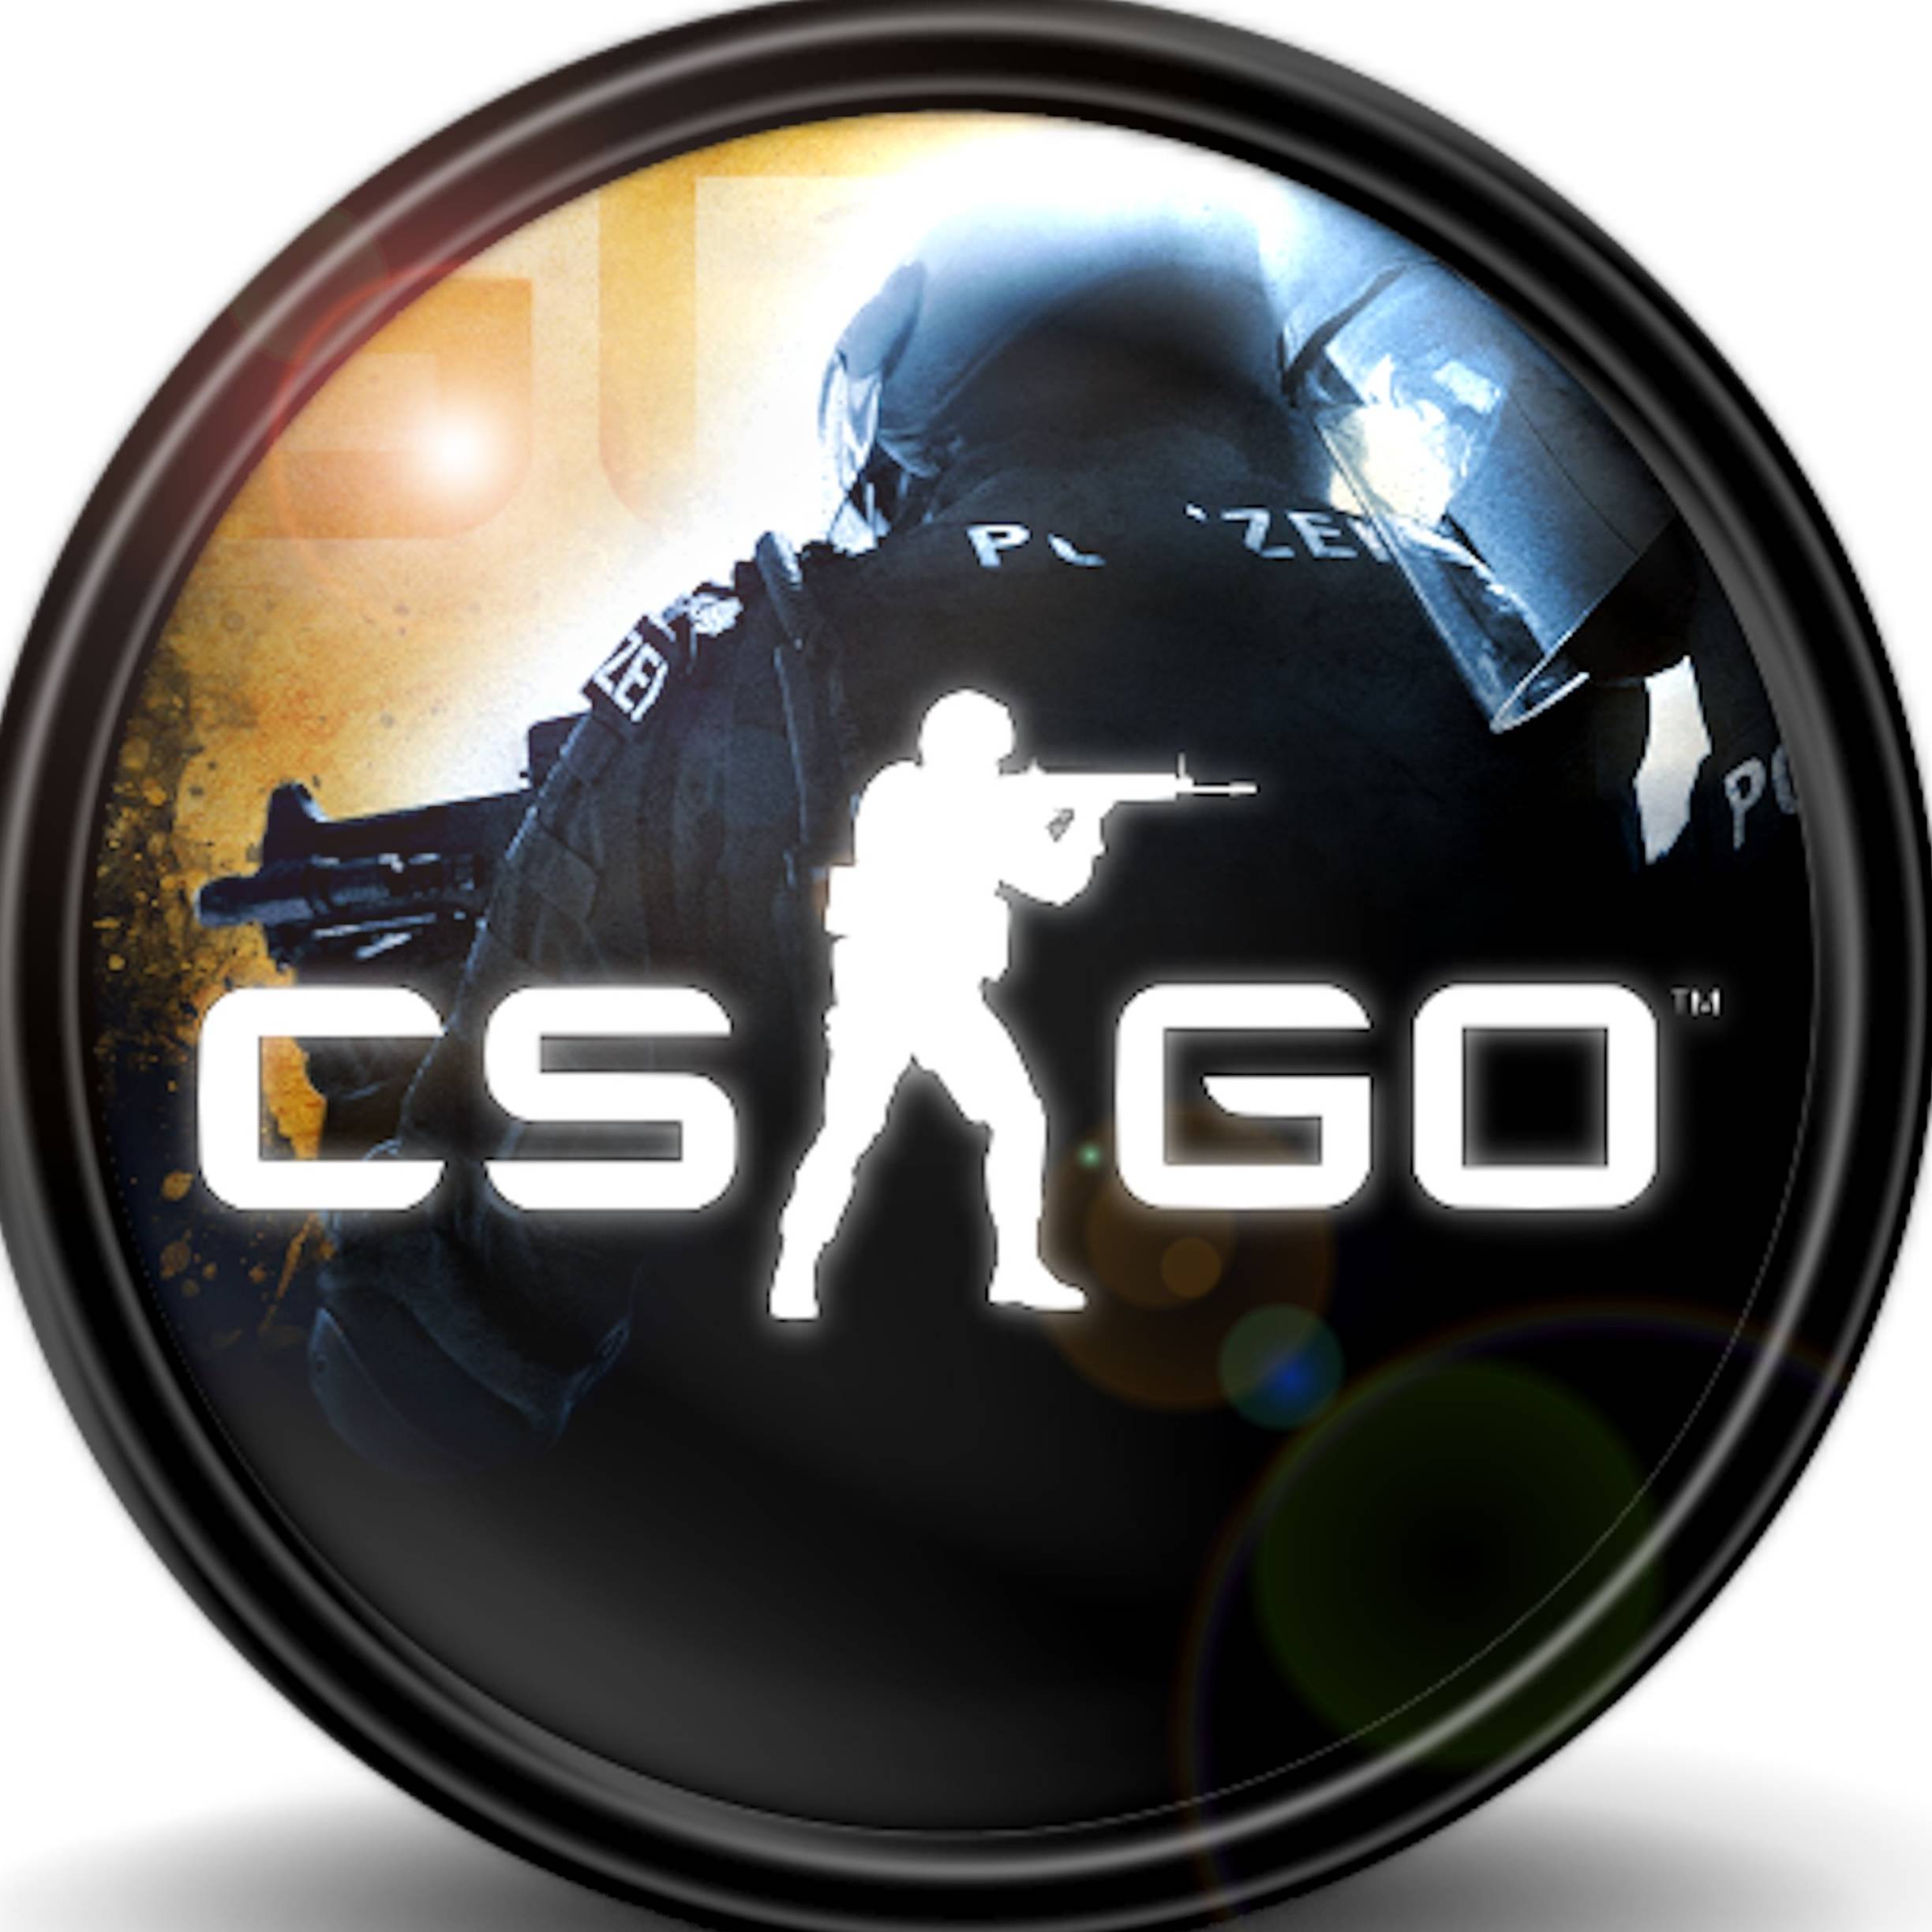 Go go icon. Counter-Strike Global Offensive значок. Иконка КС го. Круглый значок КС го. Значок CS go PNG.